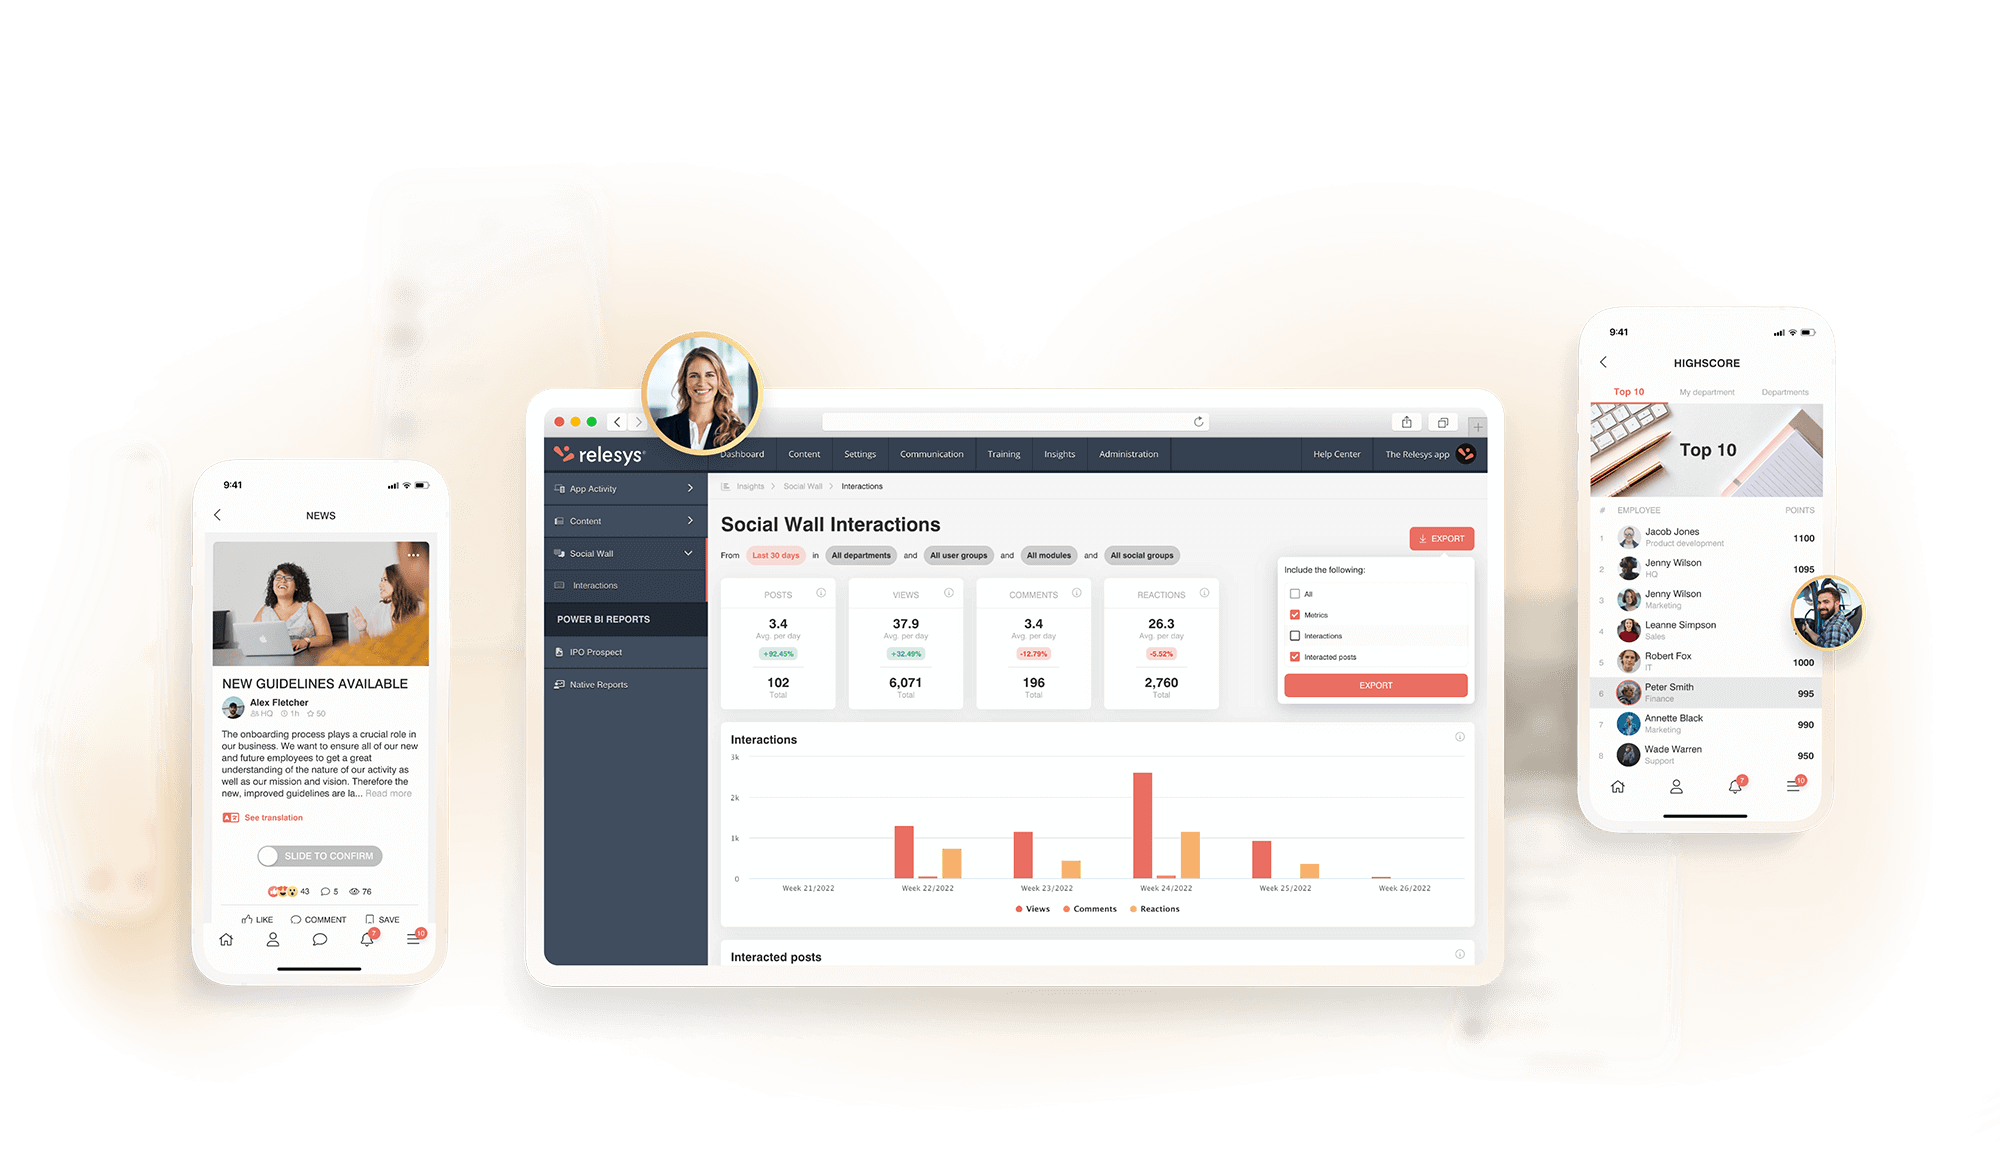 The Relesys platform from 2 views: the phone app that employees have access to; and the CMS that managers have access to for insightful analytics